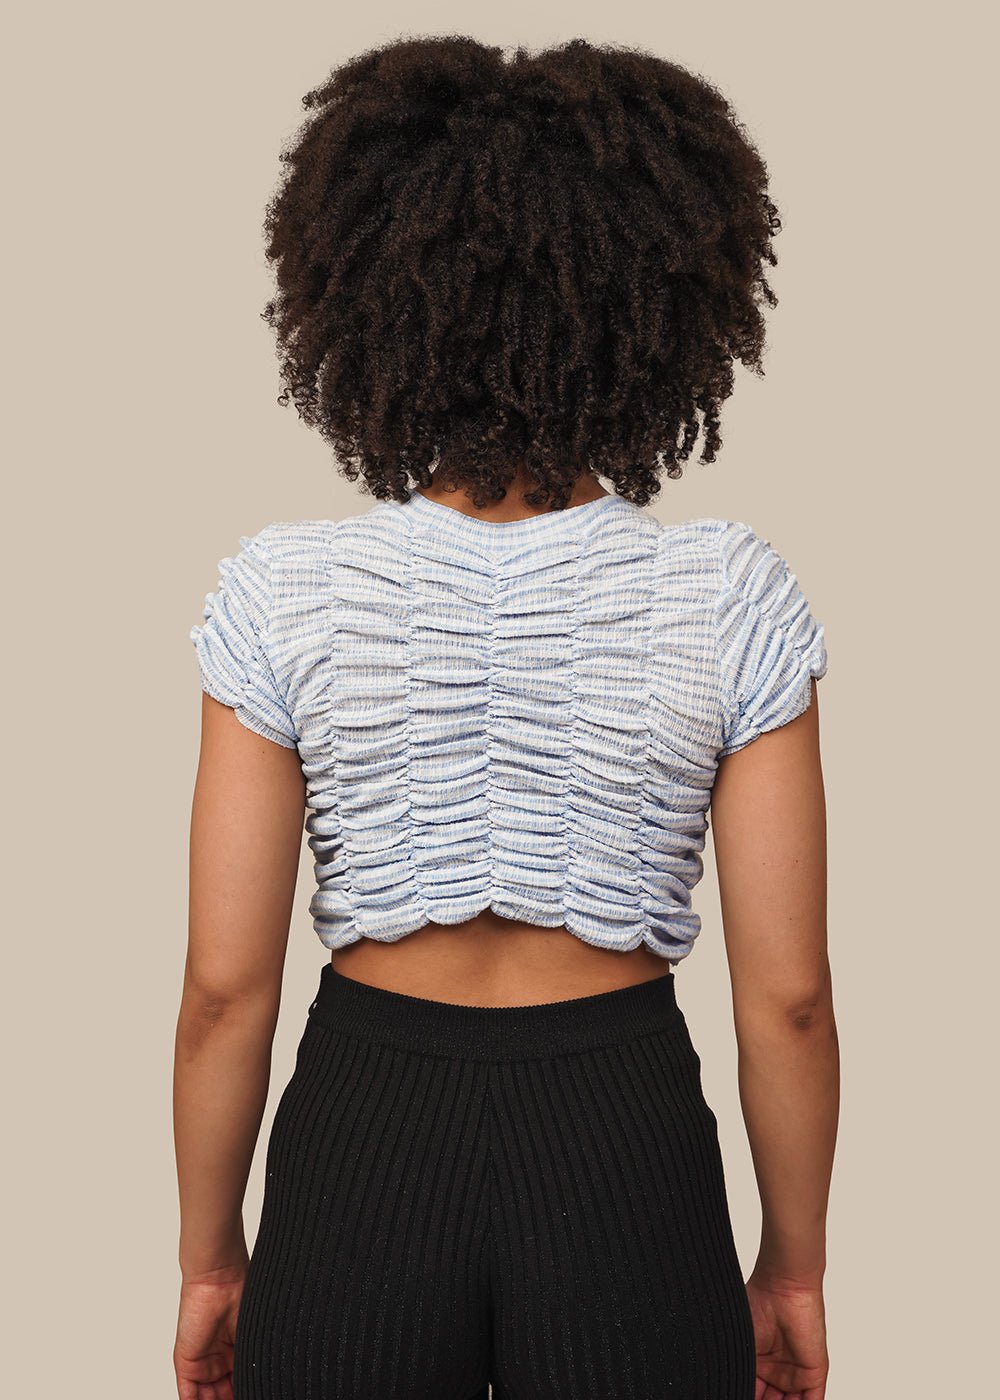 Permanent Vacation Blue Gingham Eternal Tee - New Classics Studios Sustainable Ethical Fashion Canada